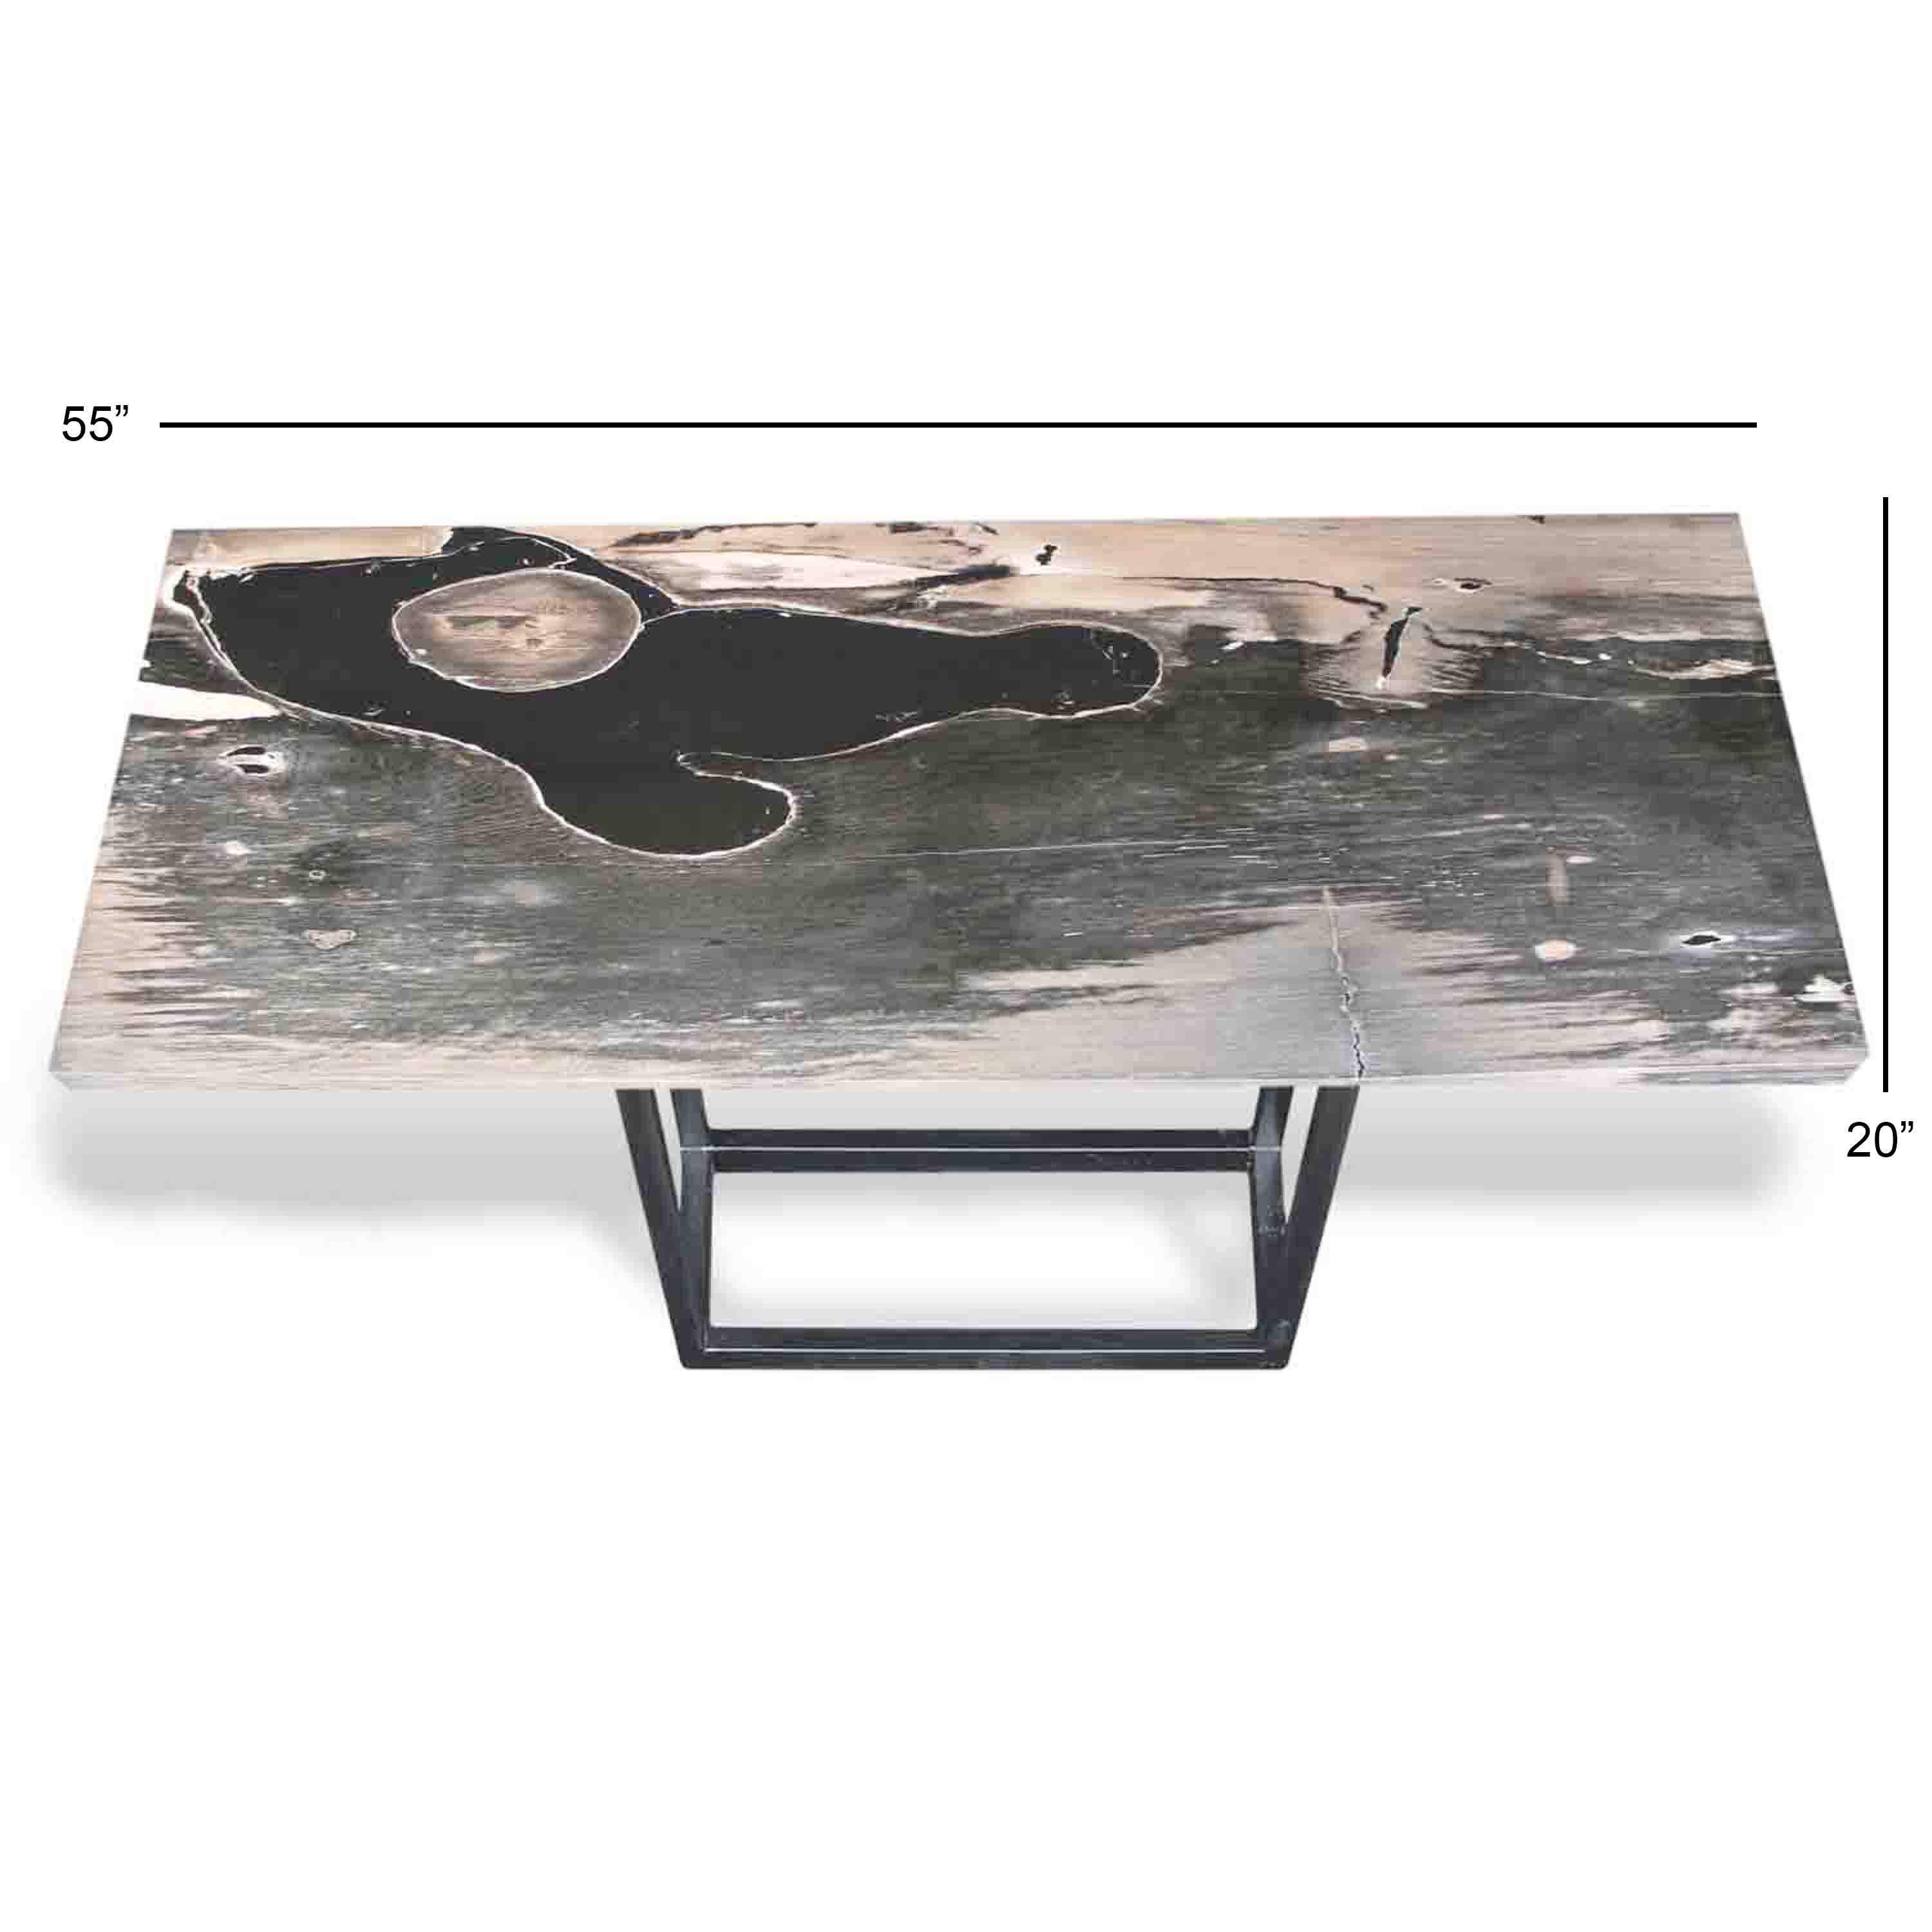 Kalifano Petrified Wood Natural Polished Petrified Wood Console Table from Indonesia - 55" / 163 lbs PWR8900.001